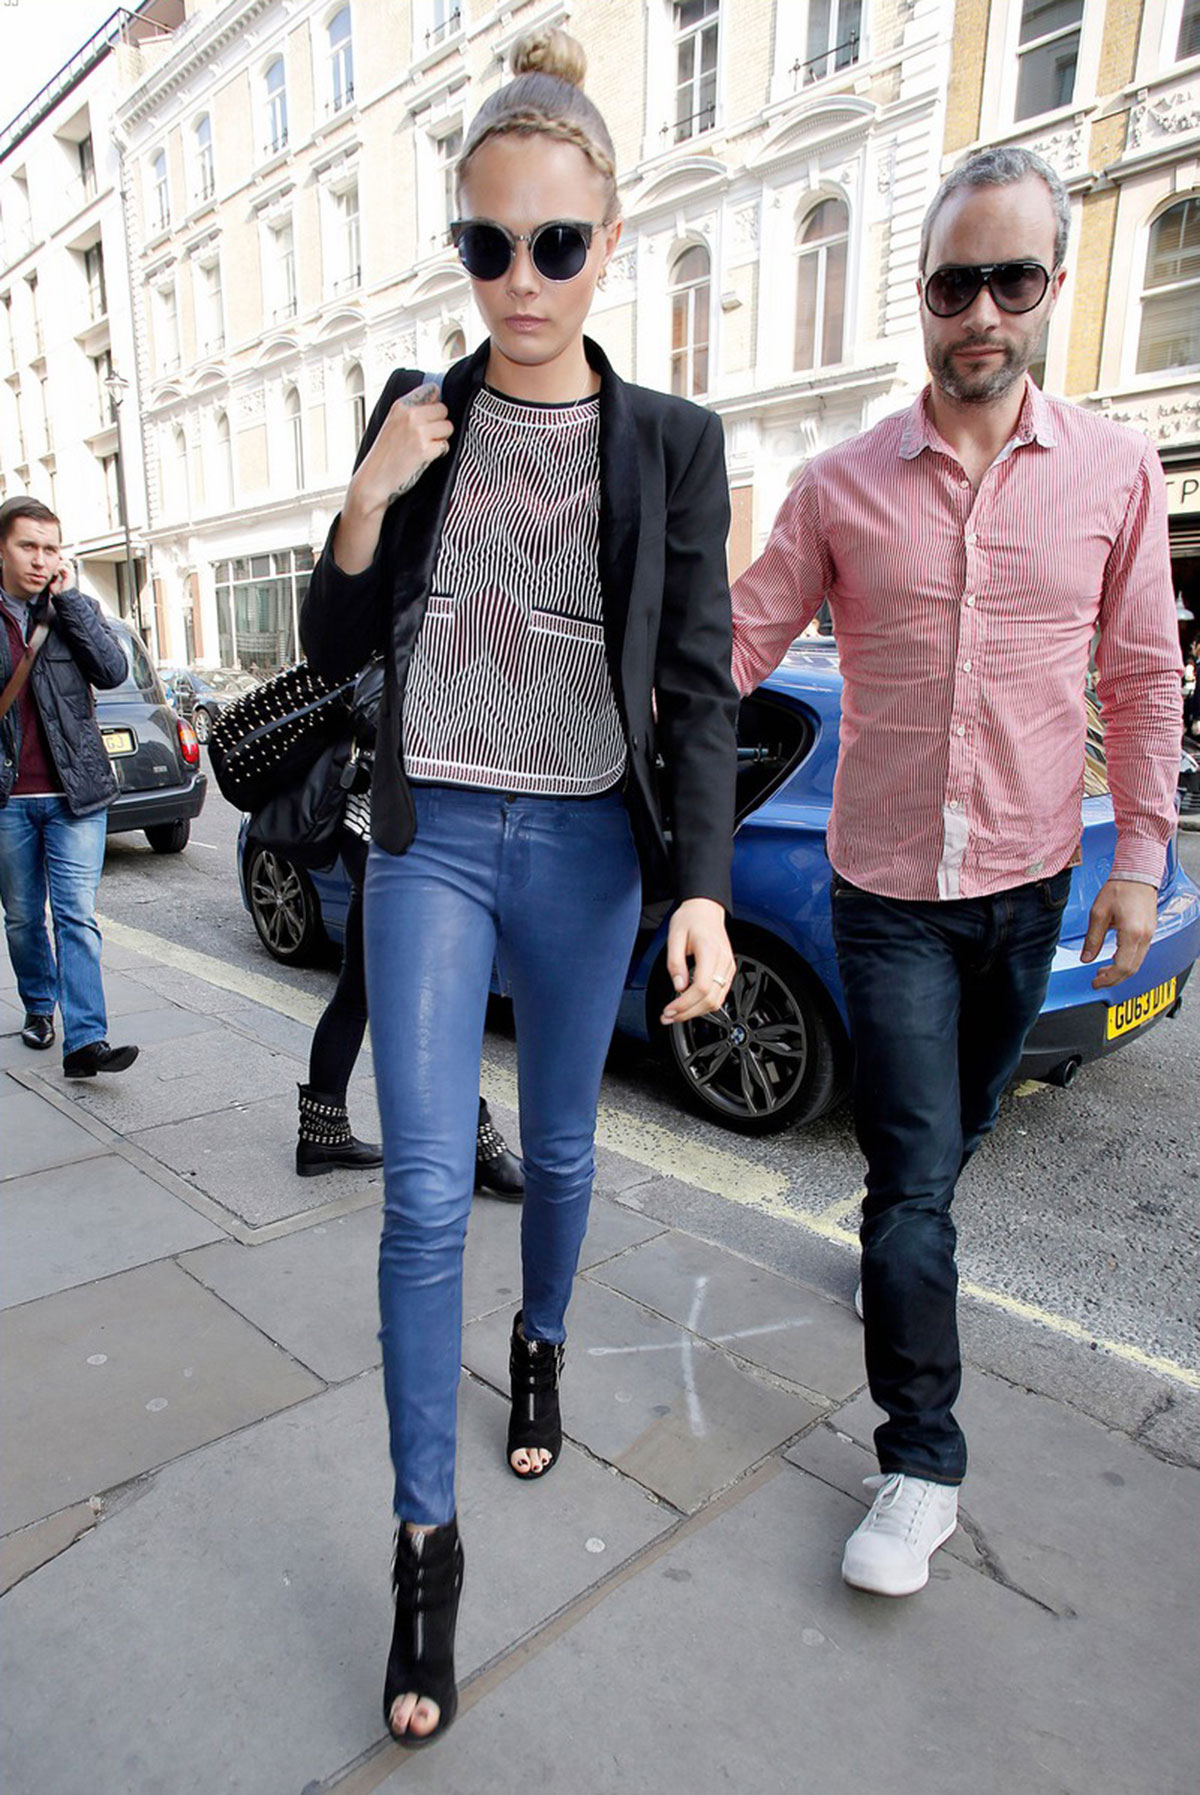 Cara Delevingne seen leaving home and heads to a London hotel